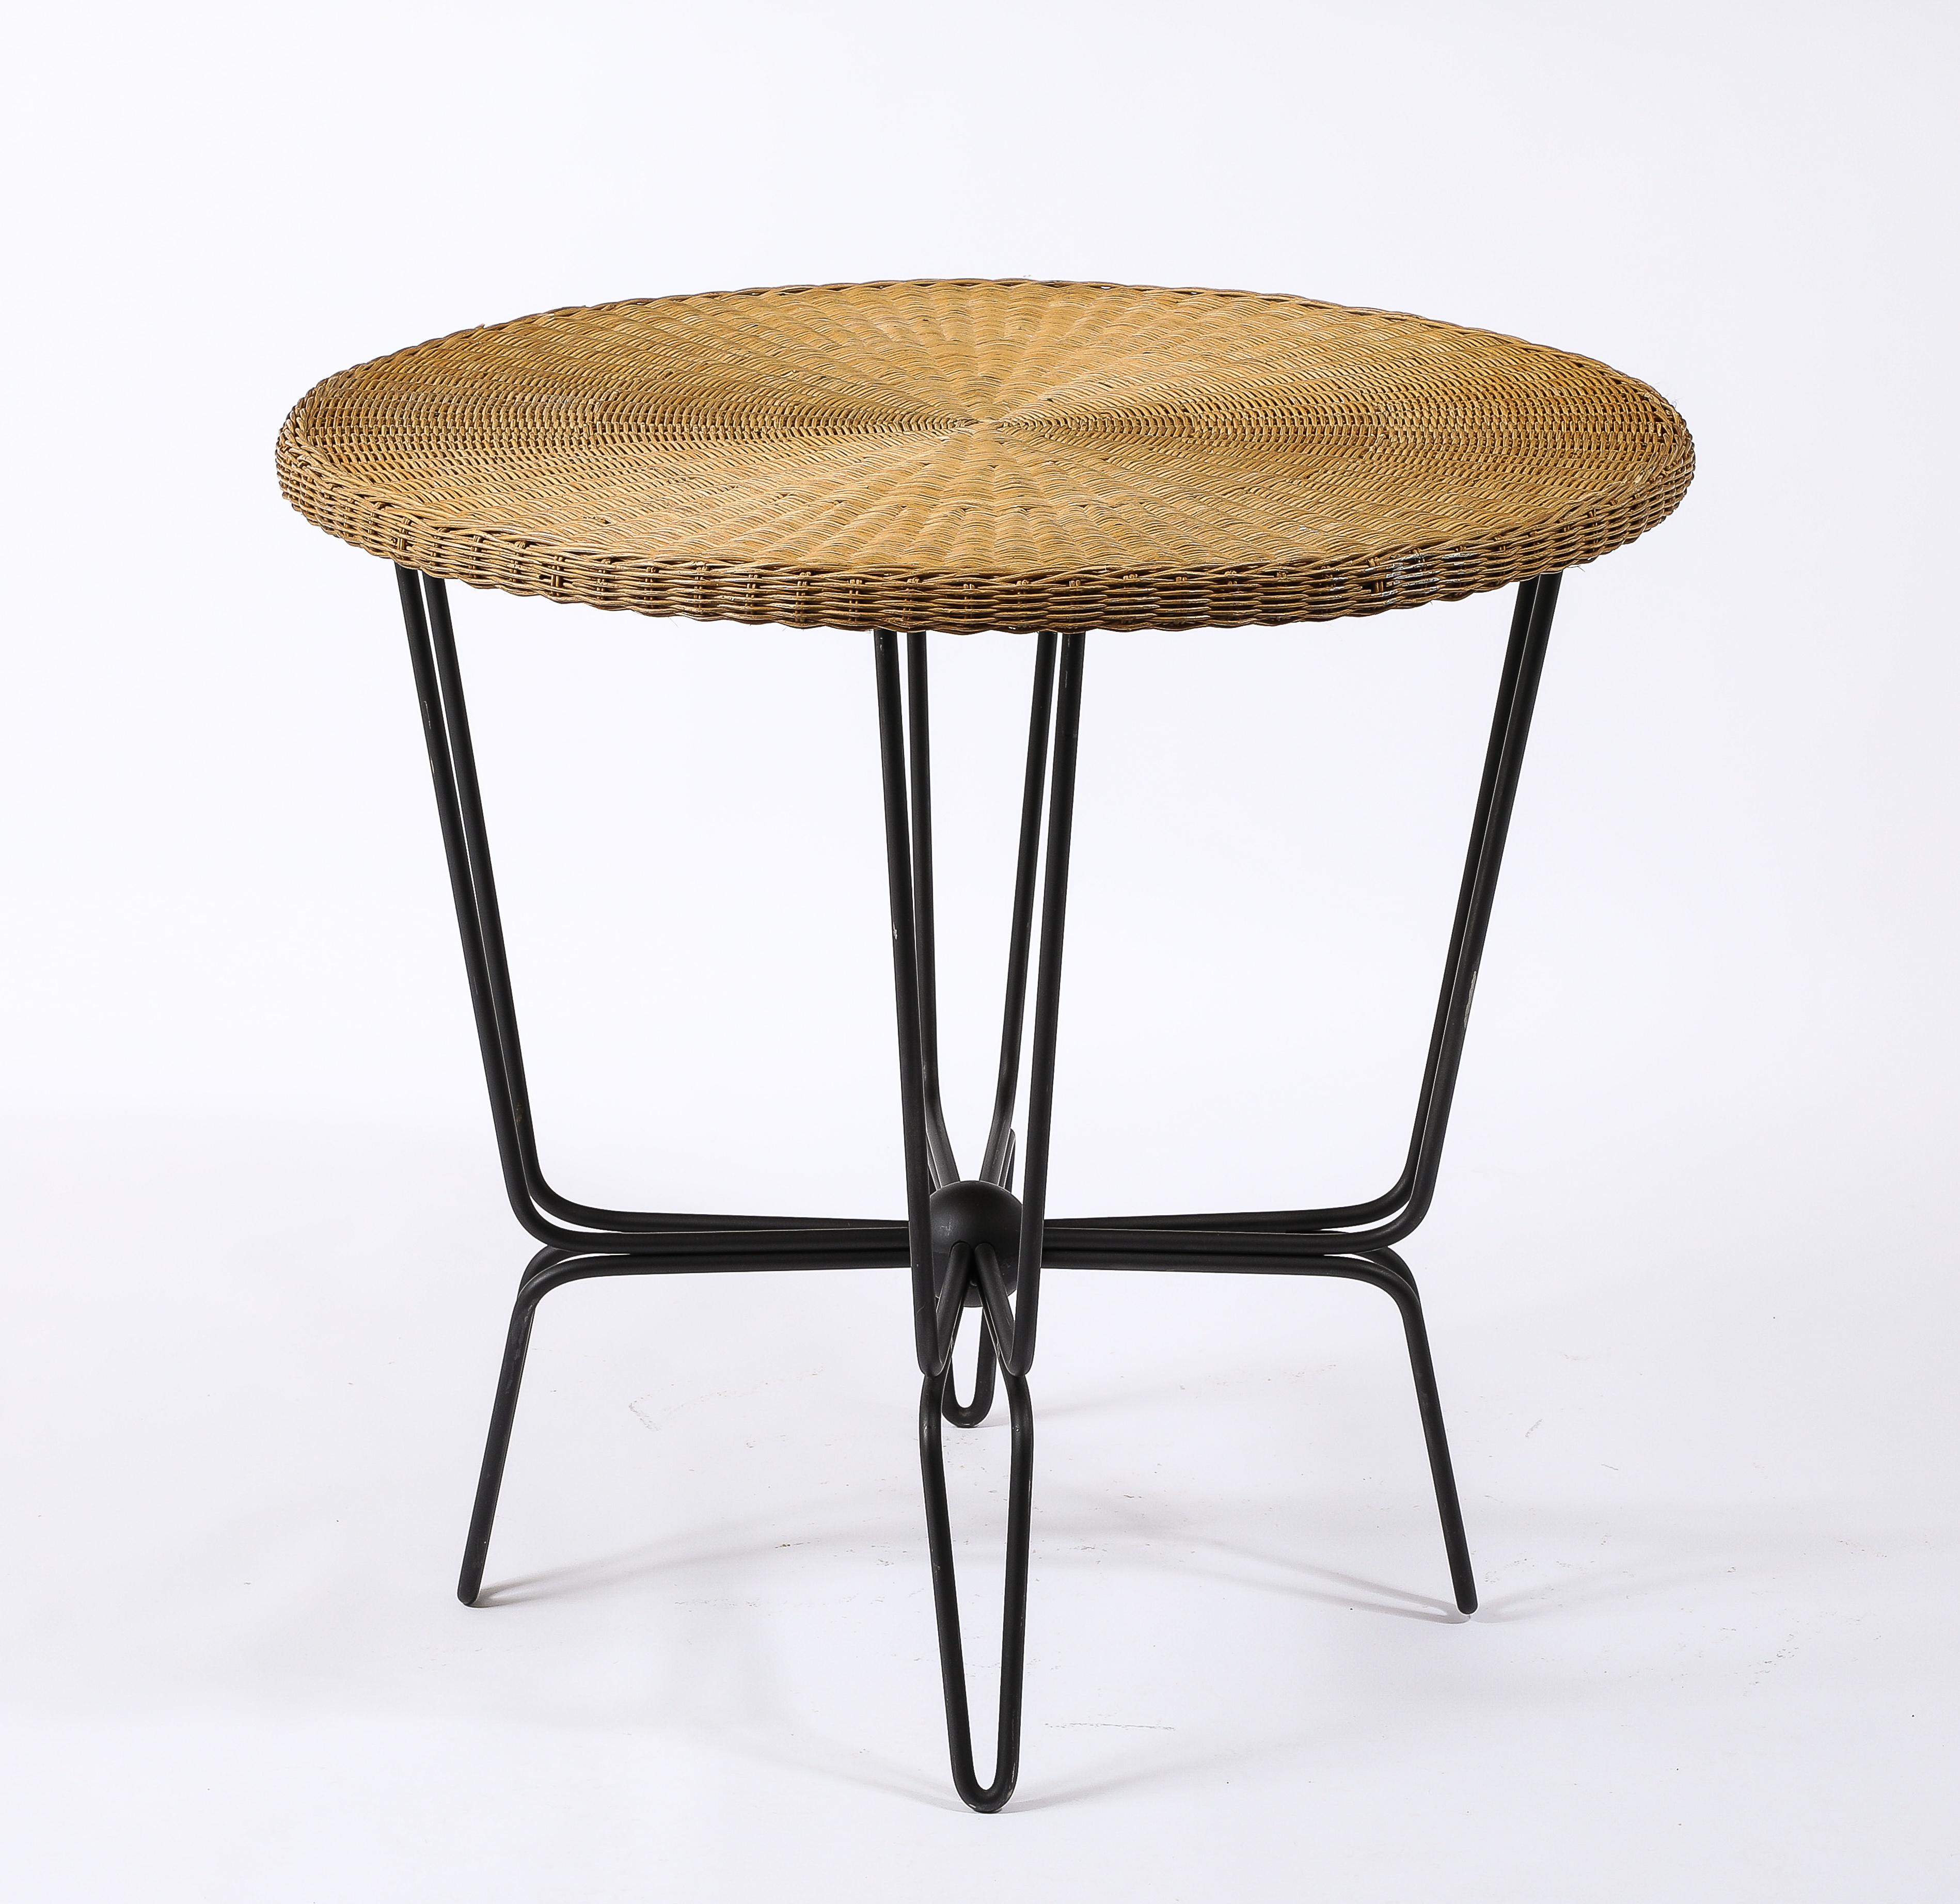 Mathieu Mategot Wrought Iron & Wicker Table, France 1950's For Sale 1